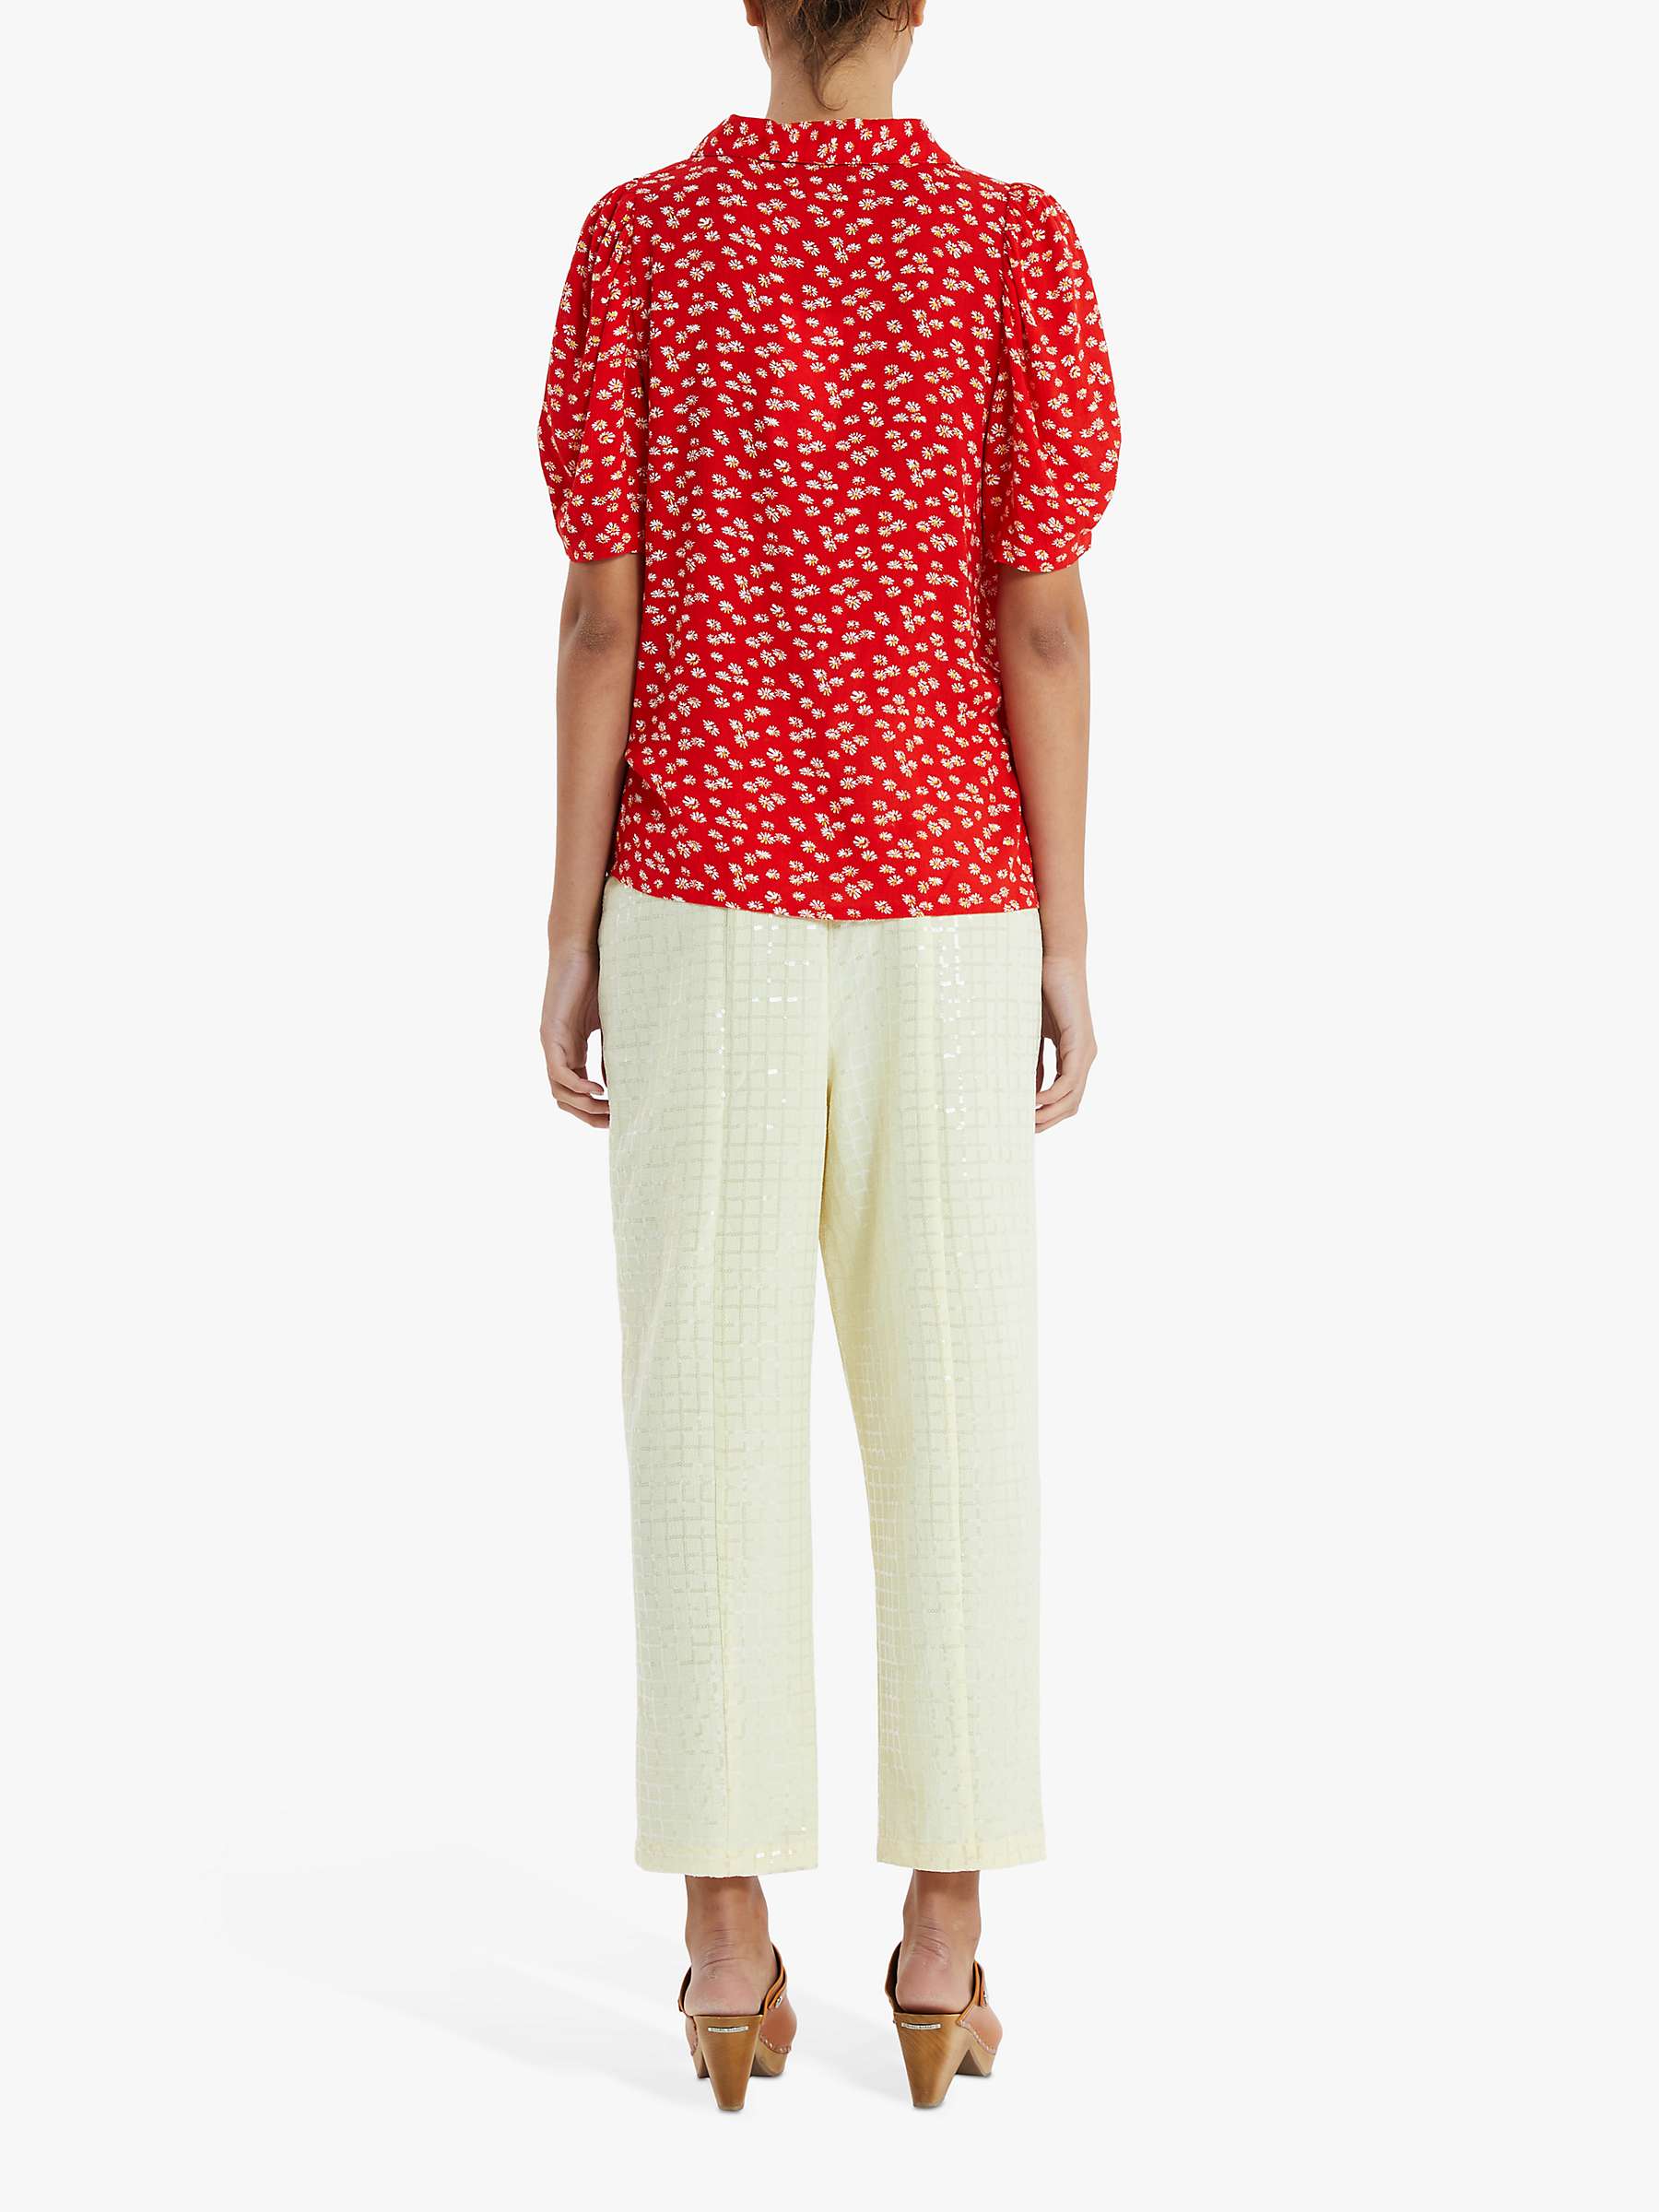 Buy Lollys Laundry Floral Print Blouse, Red/White Online at johnlewis.com